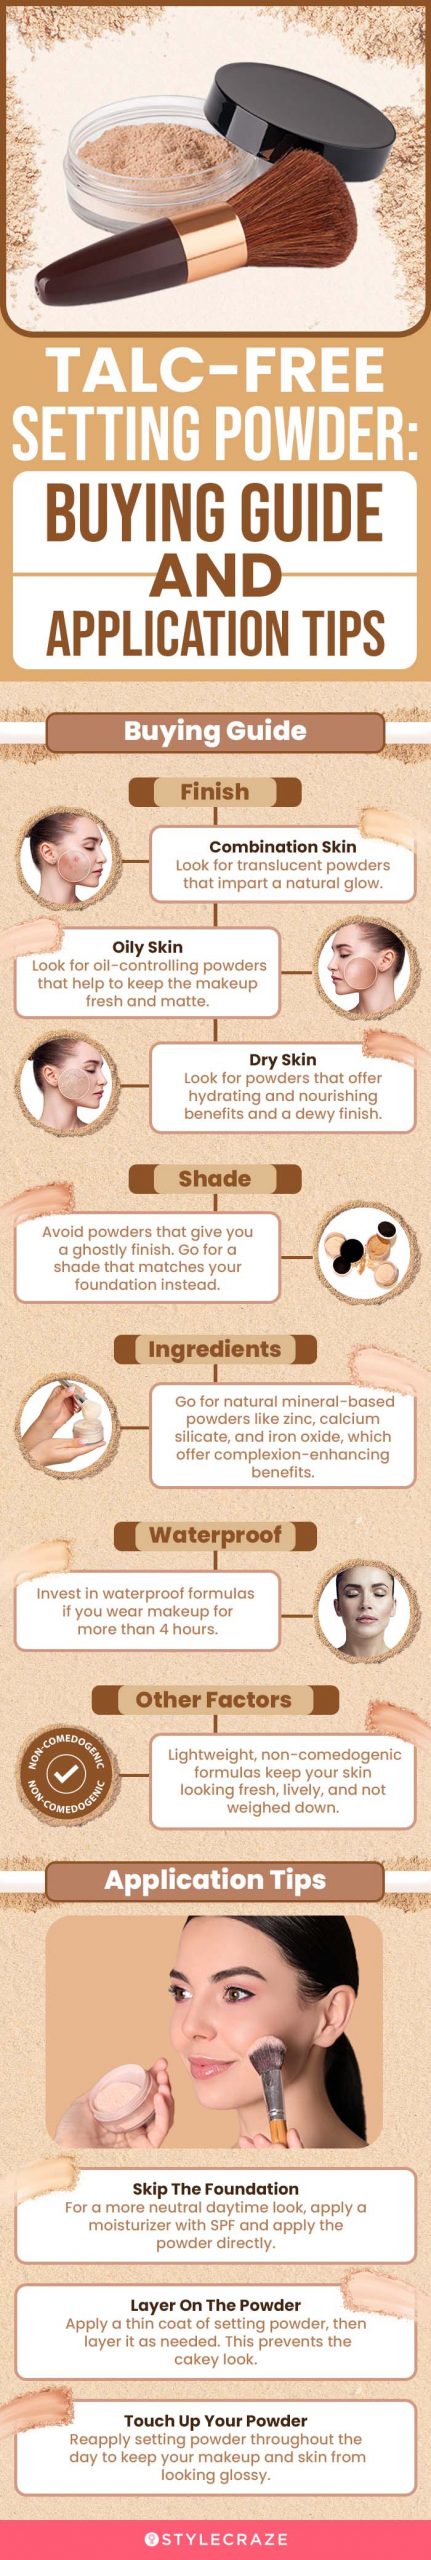 Talc-Free Setting Powder: Buying Guide And Application Ti (infographic)